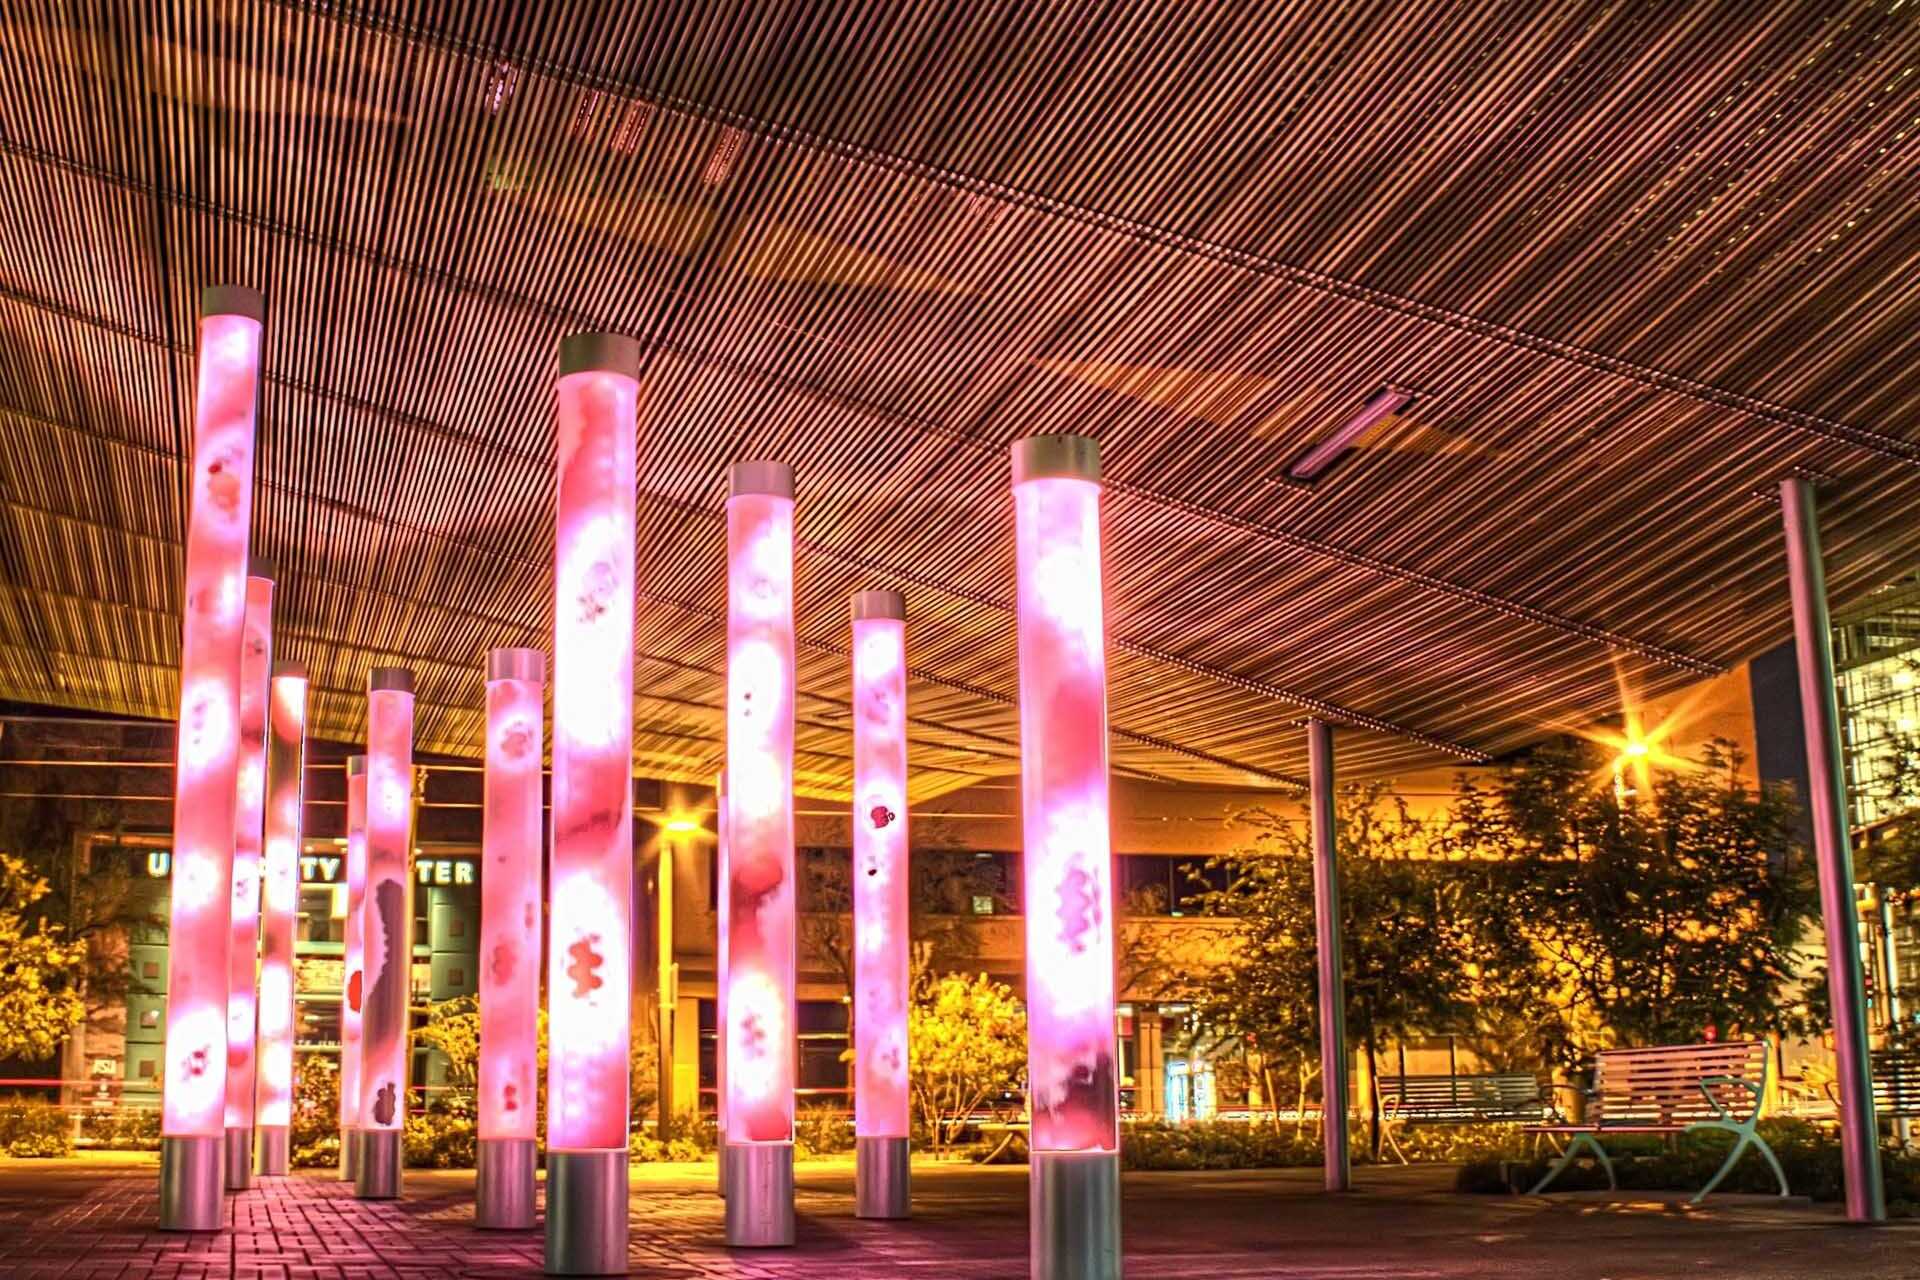 Light installation in an outdoor space